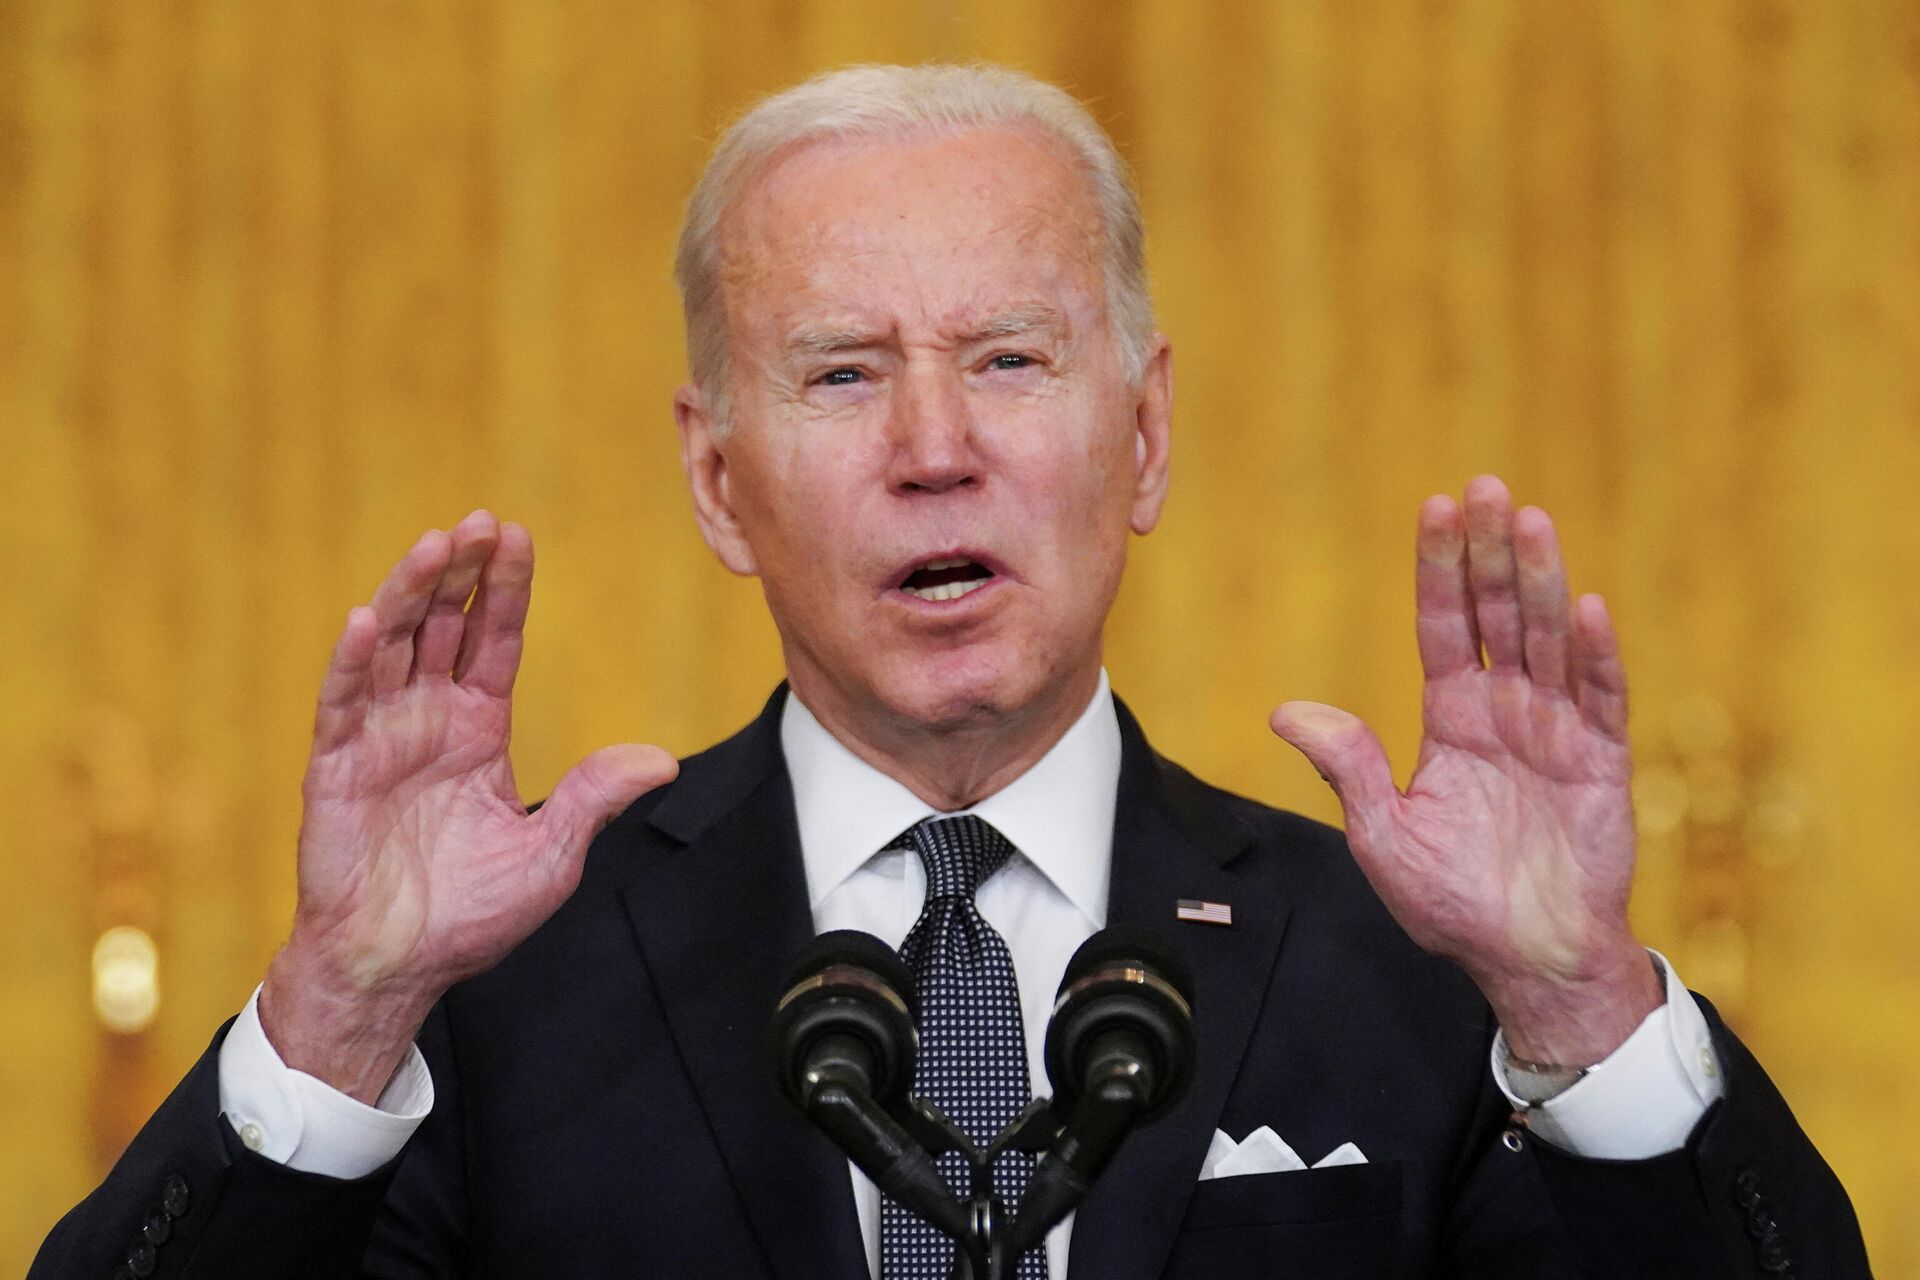 U.S. President Joe Biden gestures as he speaks about the situation in Russia and Ukraine from the White House in Washington, U.S., February 15, 2022. - Sputnik International, 1920, 17.02.2022